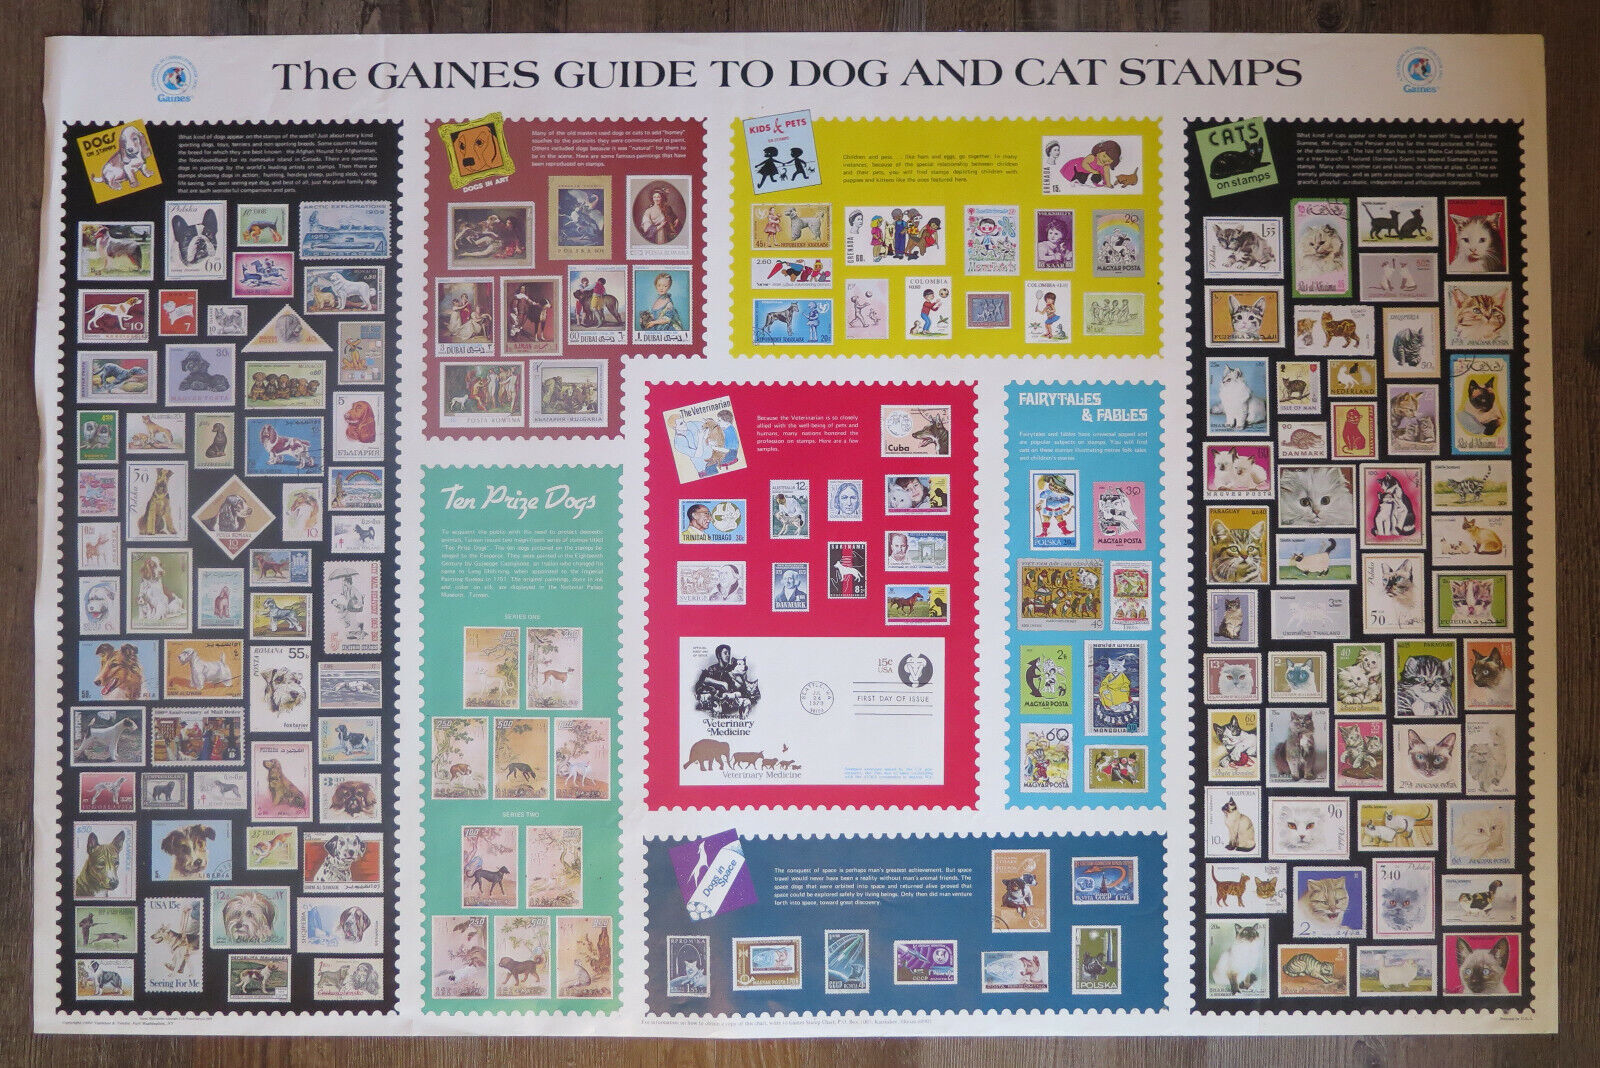 Vintage 1980 Gaines Guide to Dog & Cat Stamps huge Poster